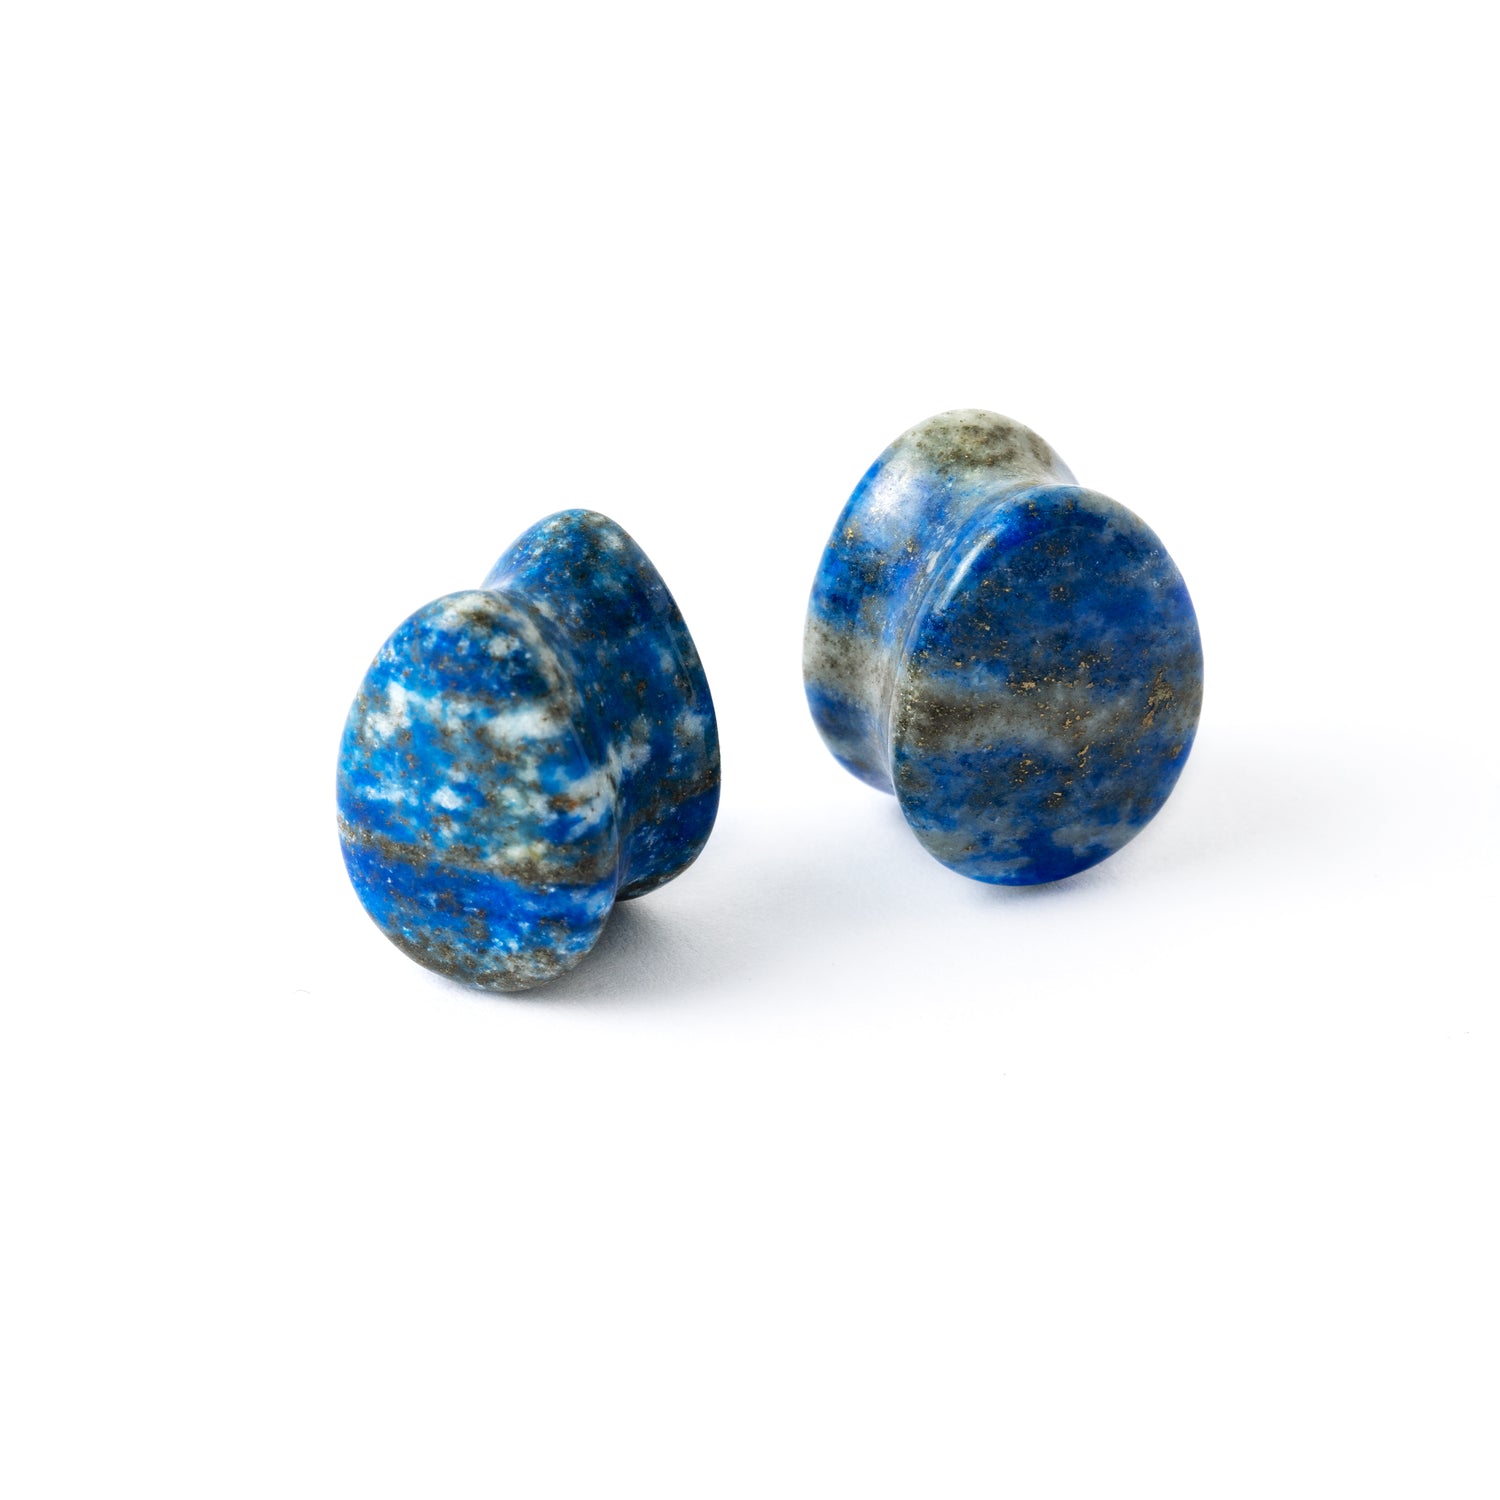 Lapis Lazuli teardrop plugs right and left side view